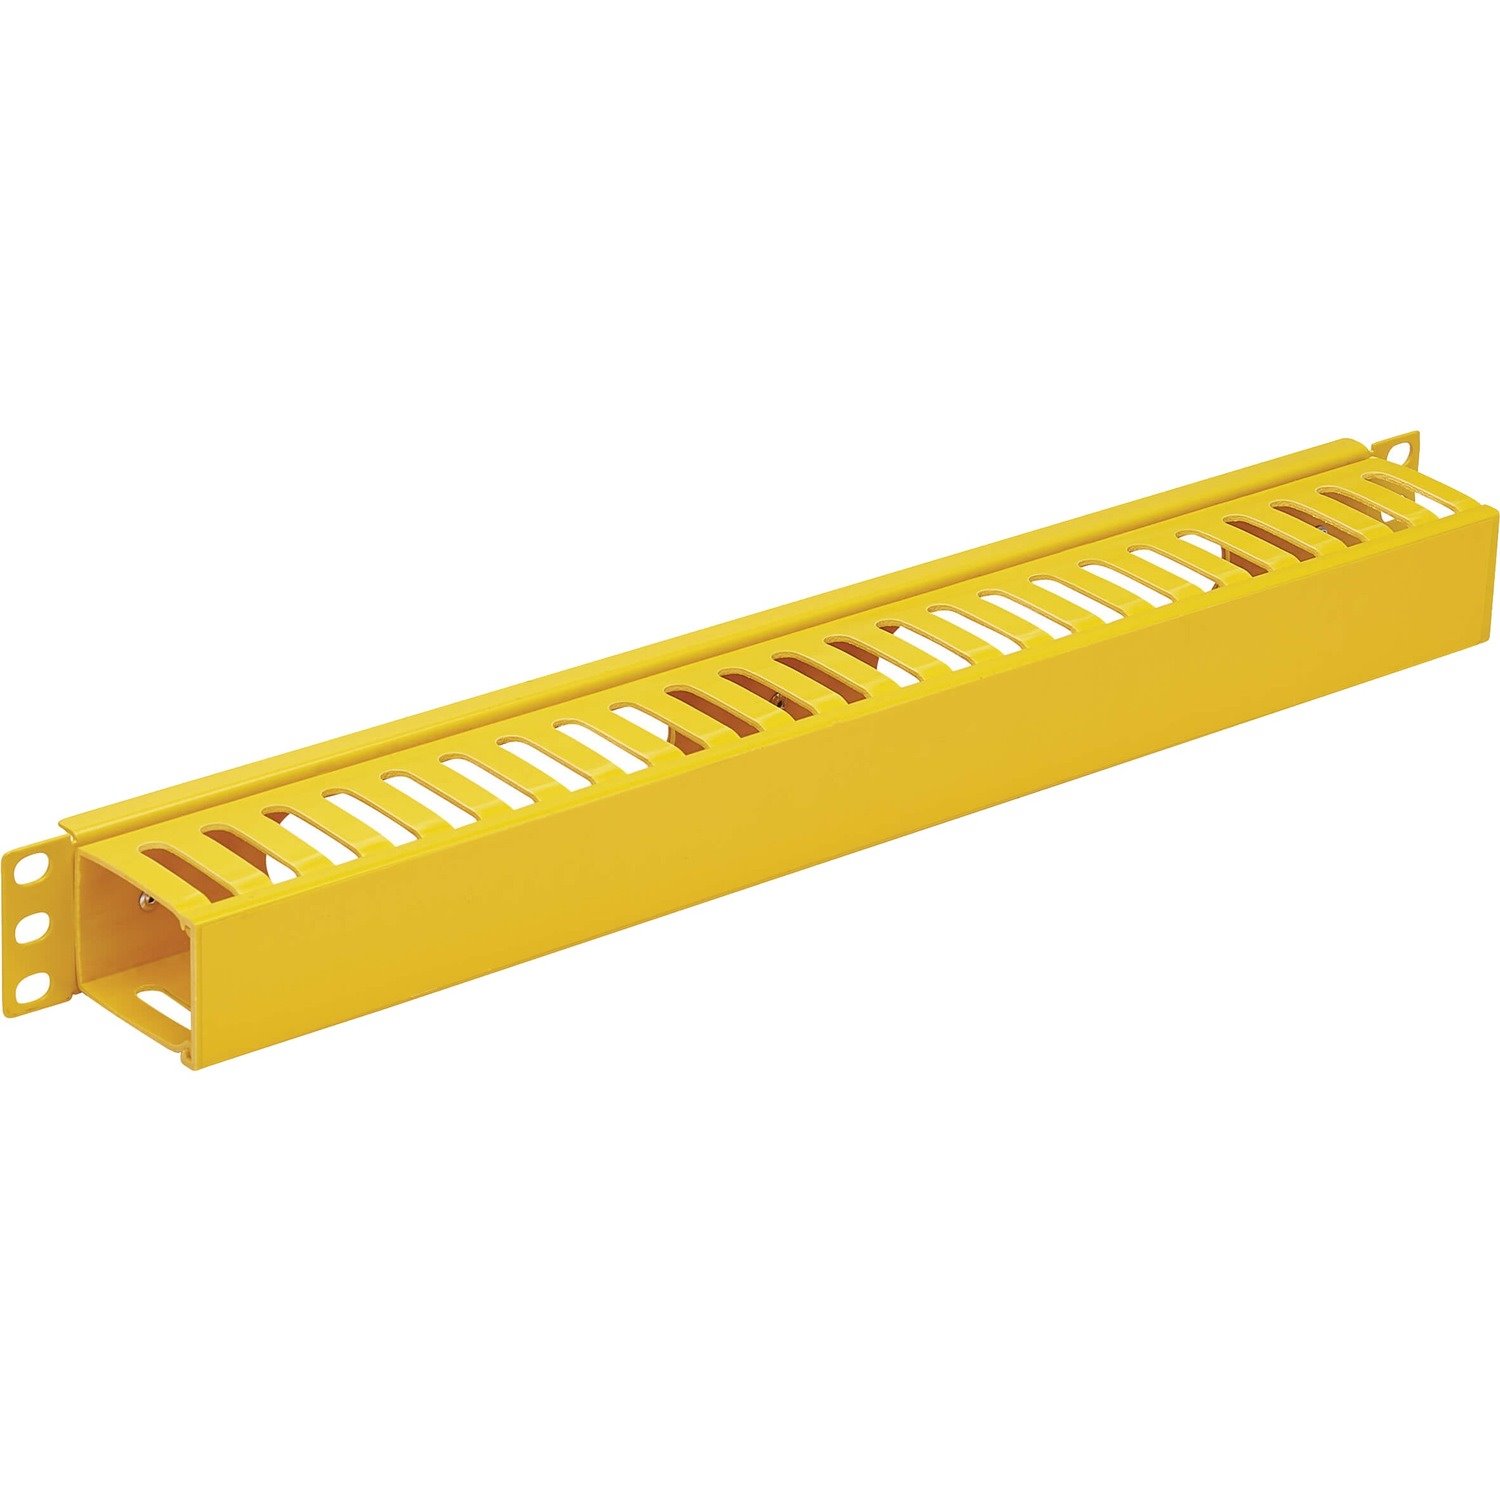 Tripp Lite by Eaton Horizontal Cable Manager - Finger Duct with Cover, Yellow, 1U